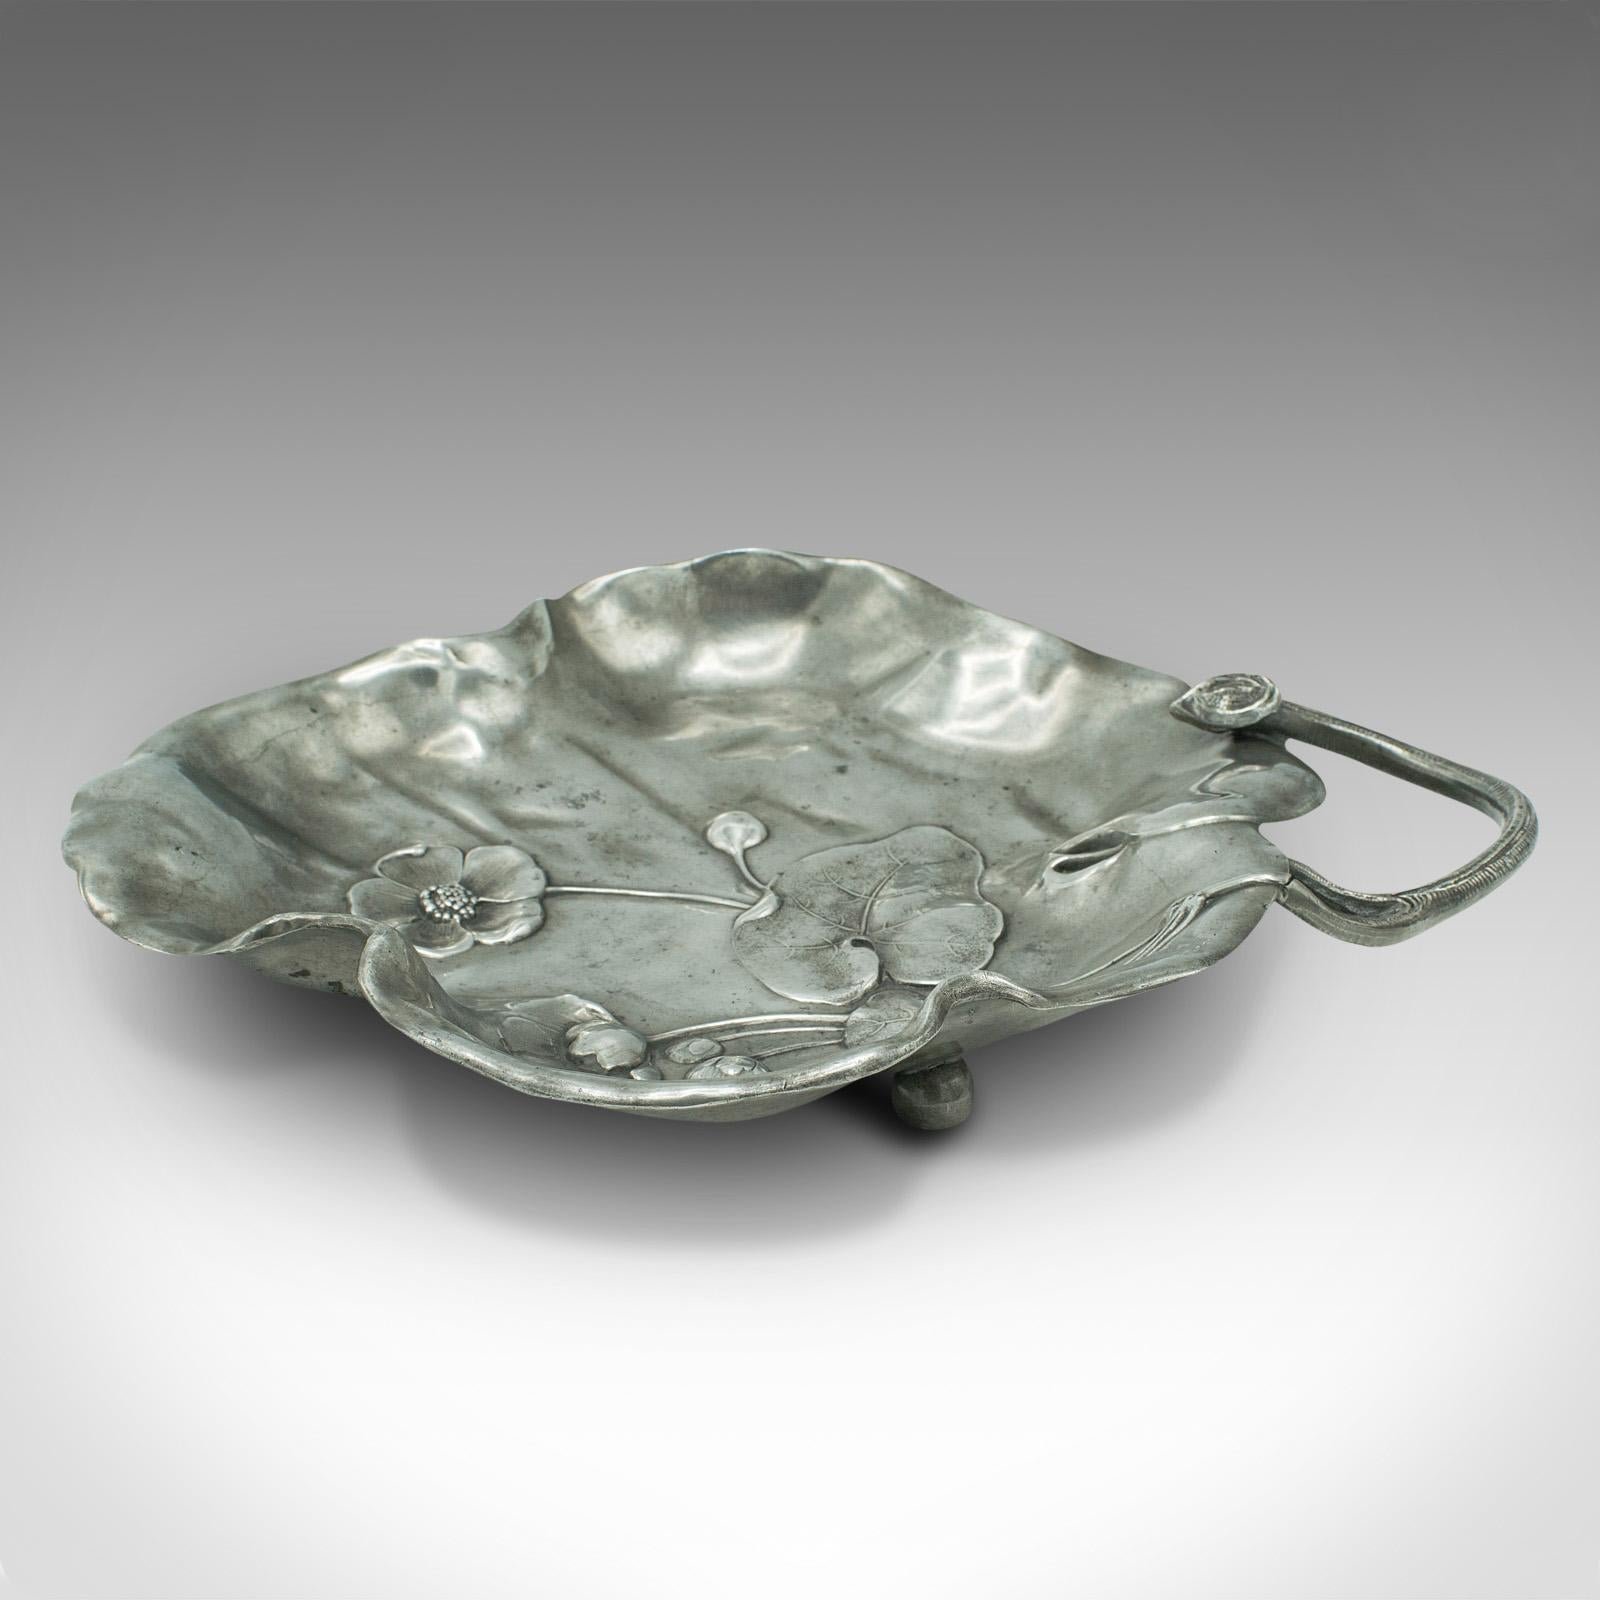 This is an antique decorative dish. A German, pewter bonbon tray in Art Nouveau taste, dating to the Edwardian period, circa 1910.

Delightful dogwood blossom decor adorns this charming dish
Displaying a desirable aged patina and in good